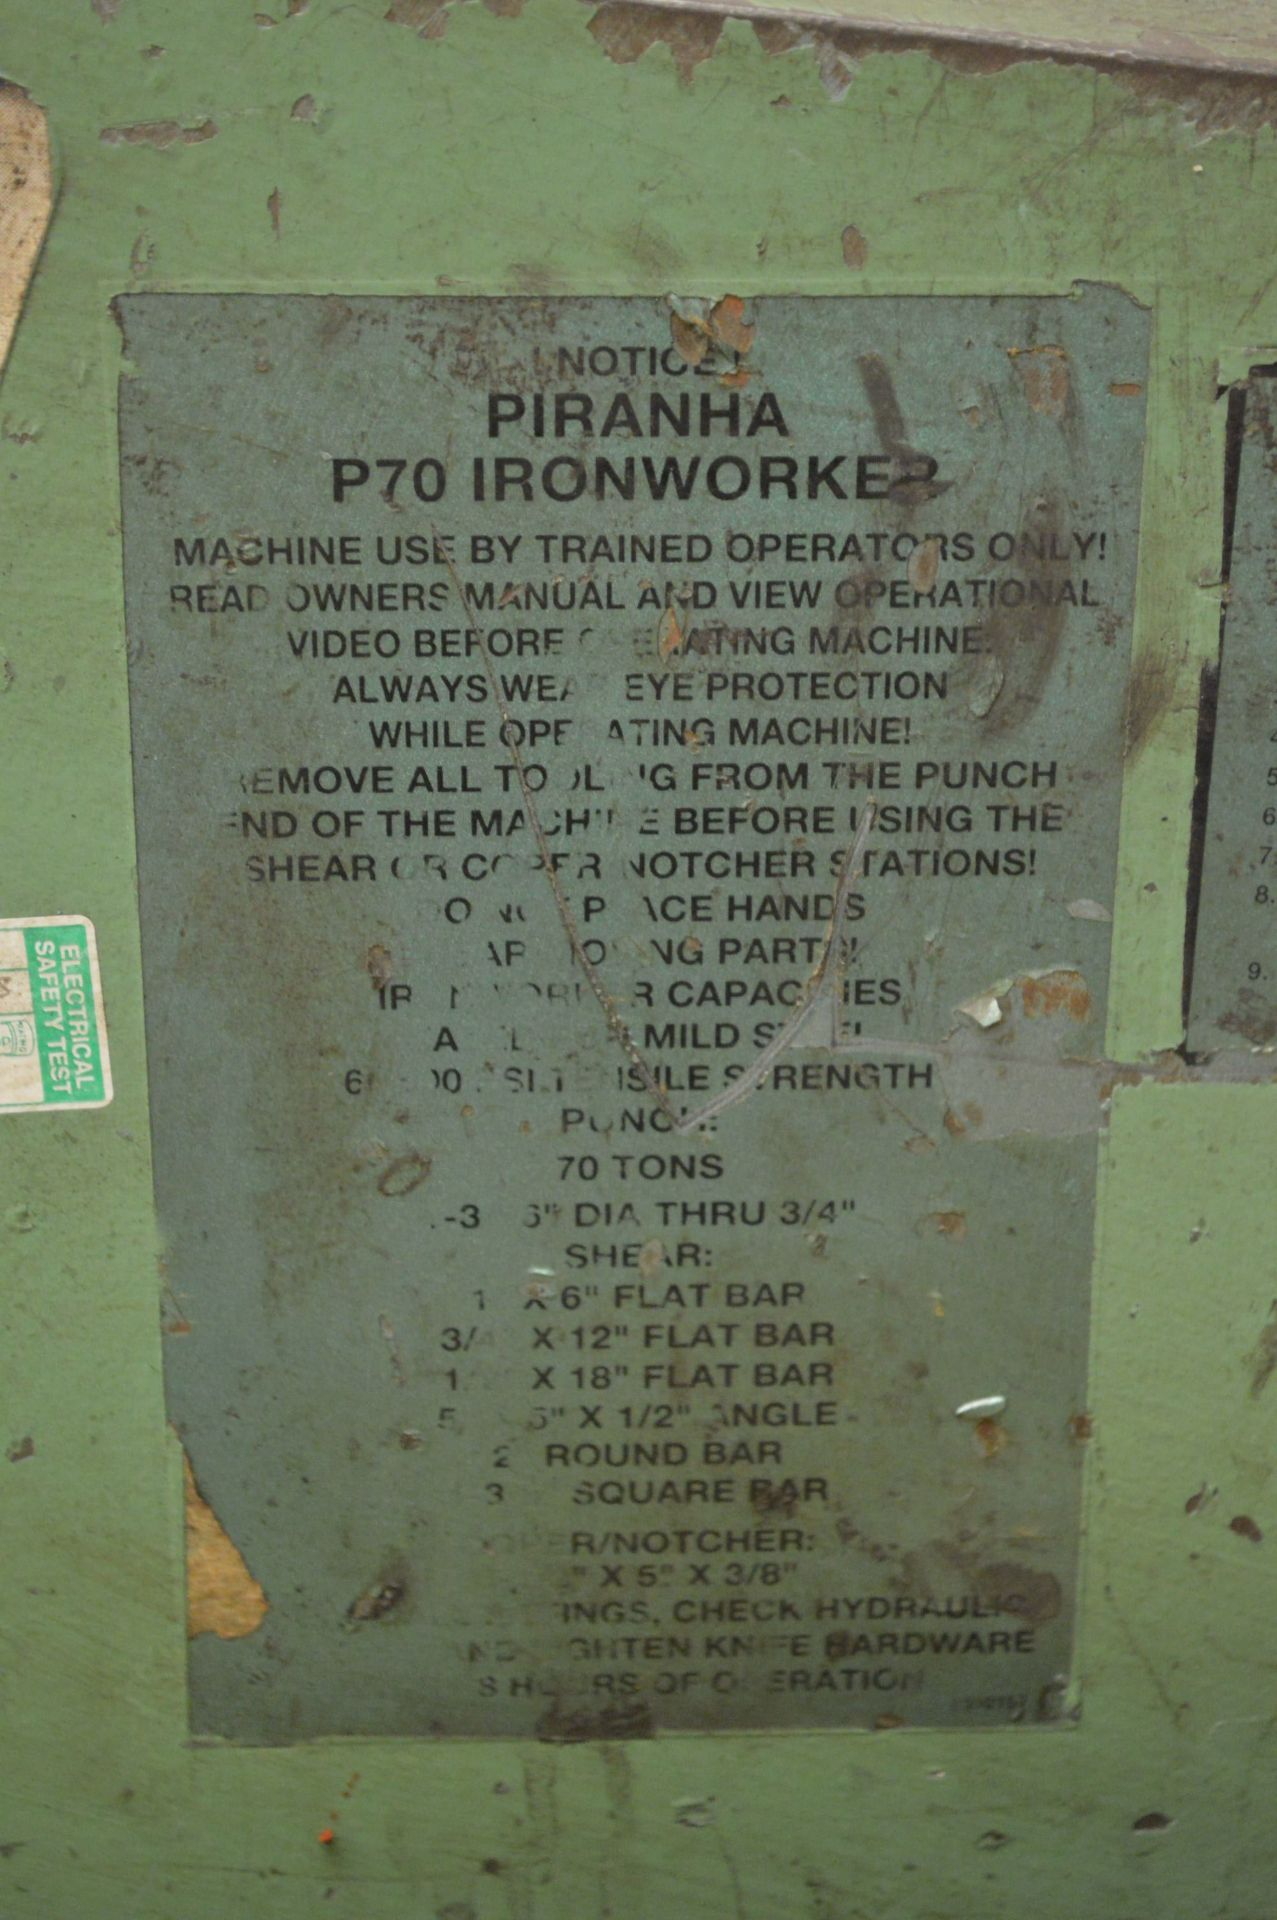 Piranha P70 HYDRAULIC IRON WORKER, serial no. P70-994, with tooling as set out - Image 6 of 6